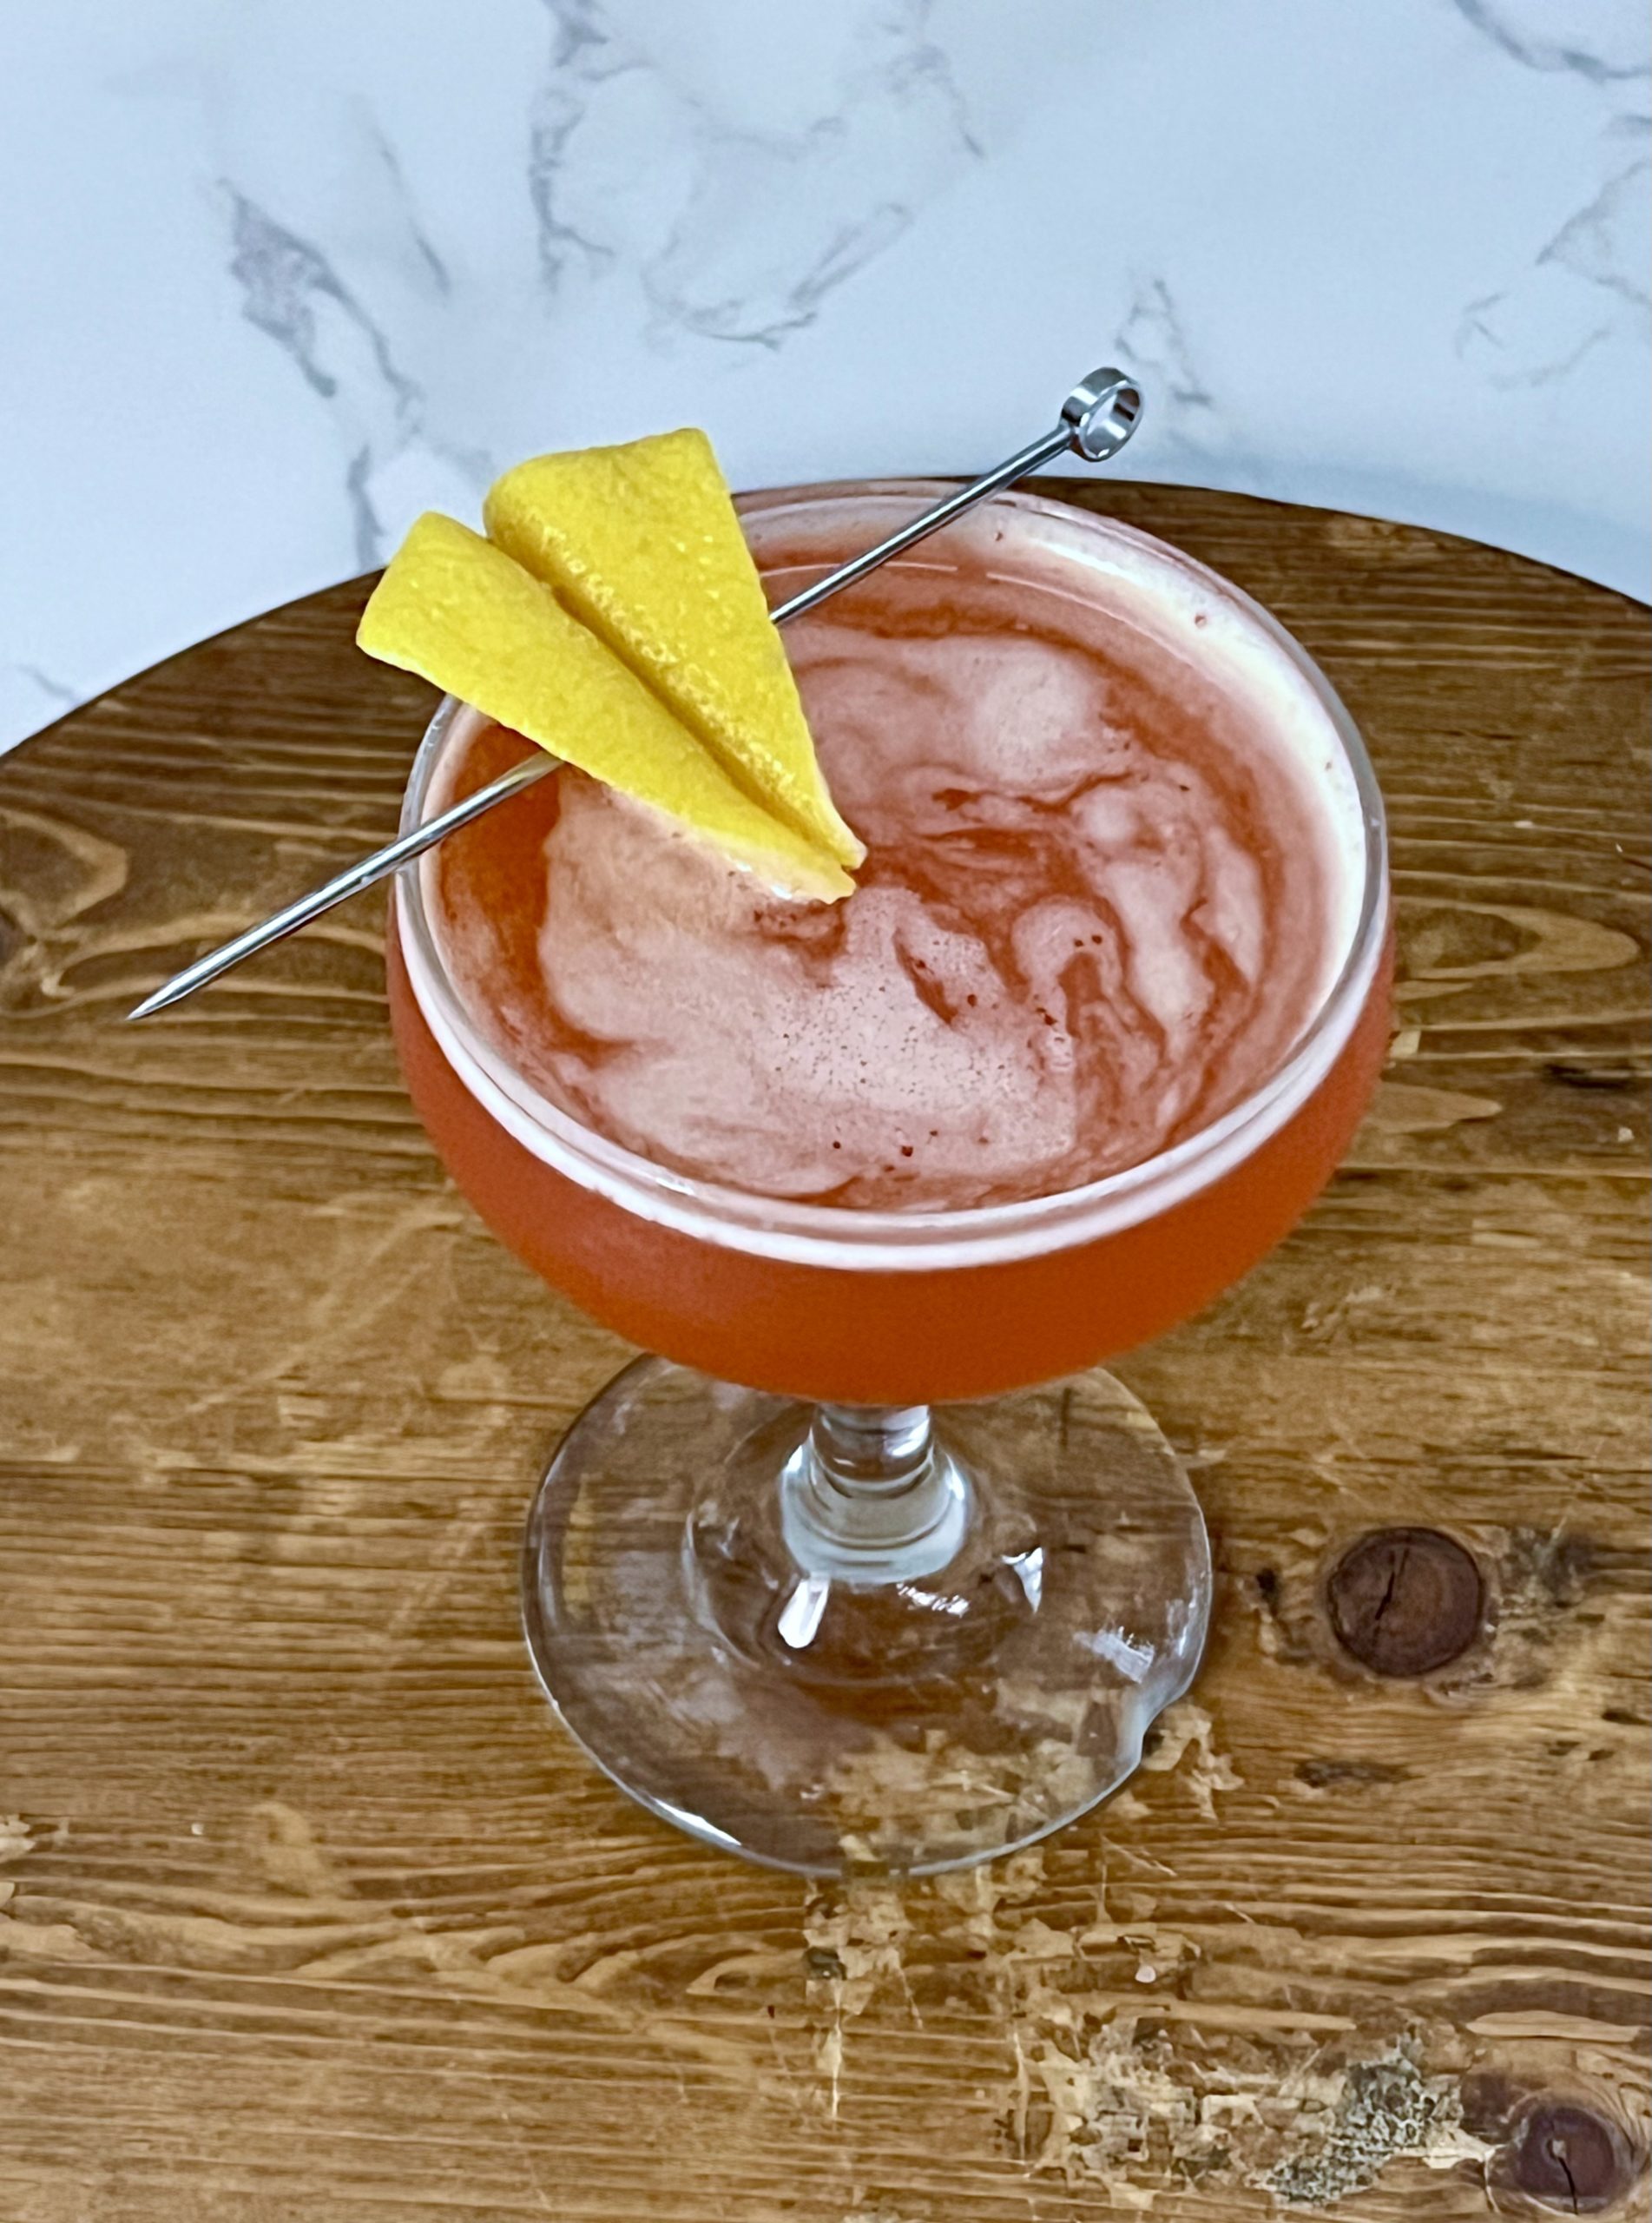 A close up of a paper plane garnish made out of a lemon peel on a vivid red Paper Plane cocktail.